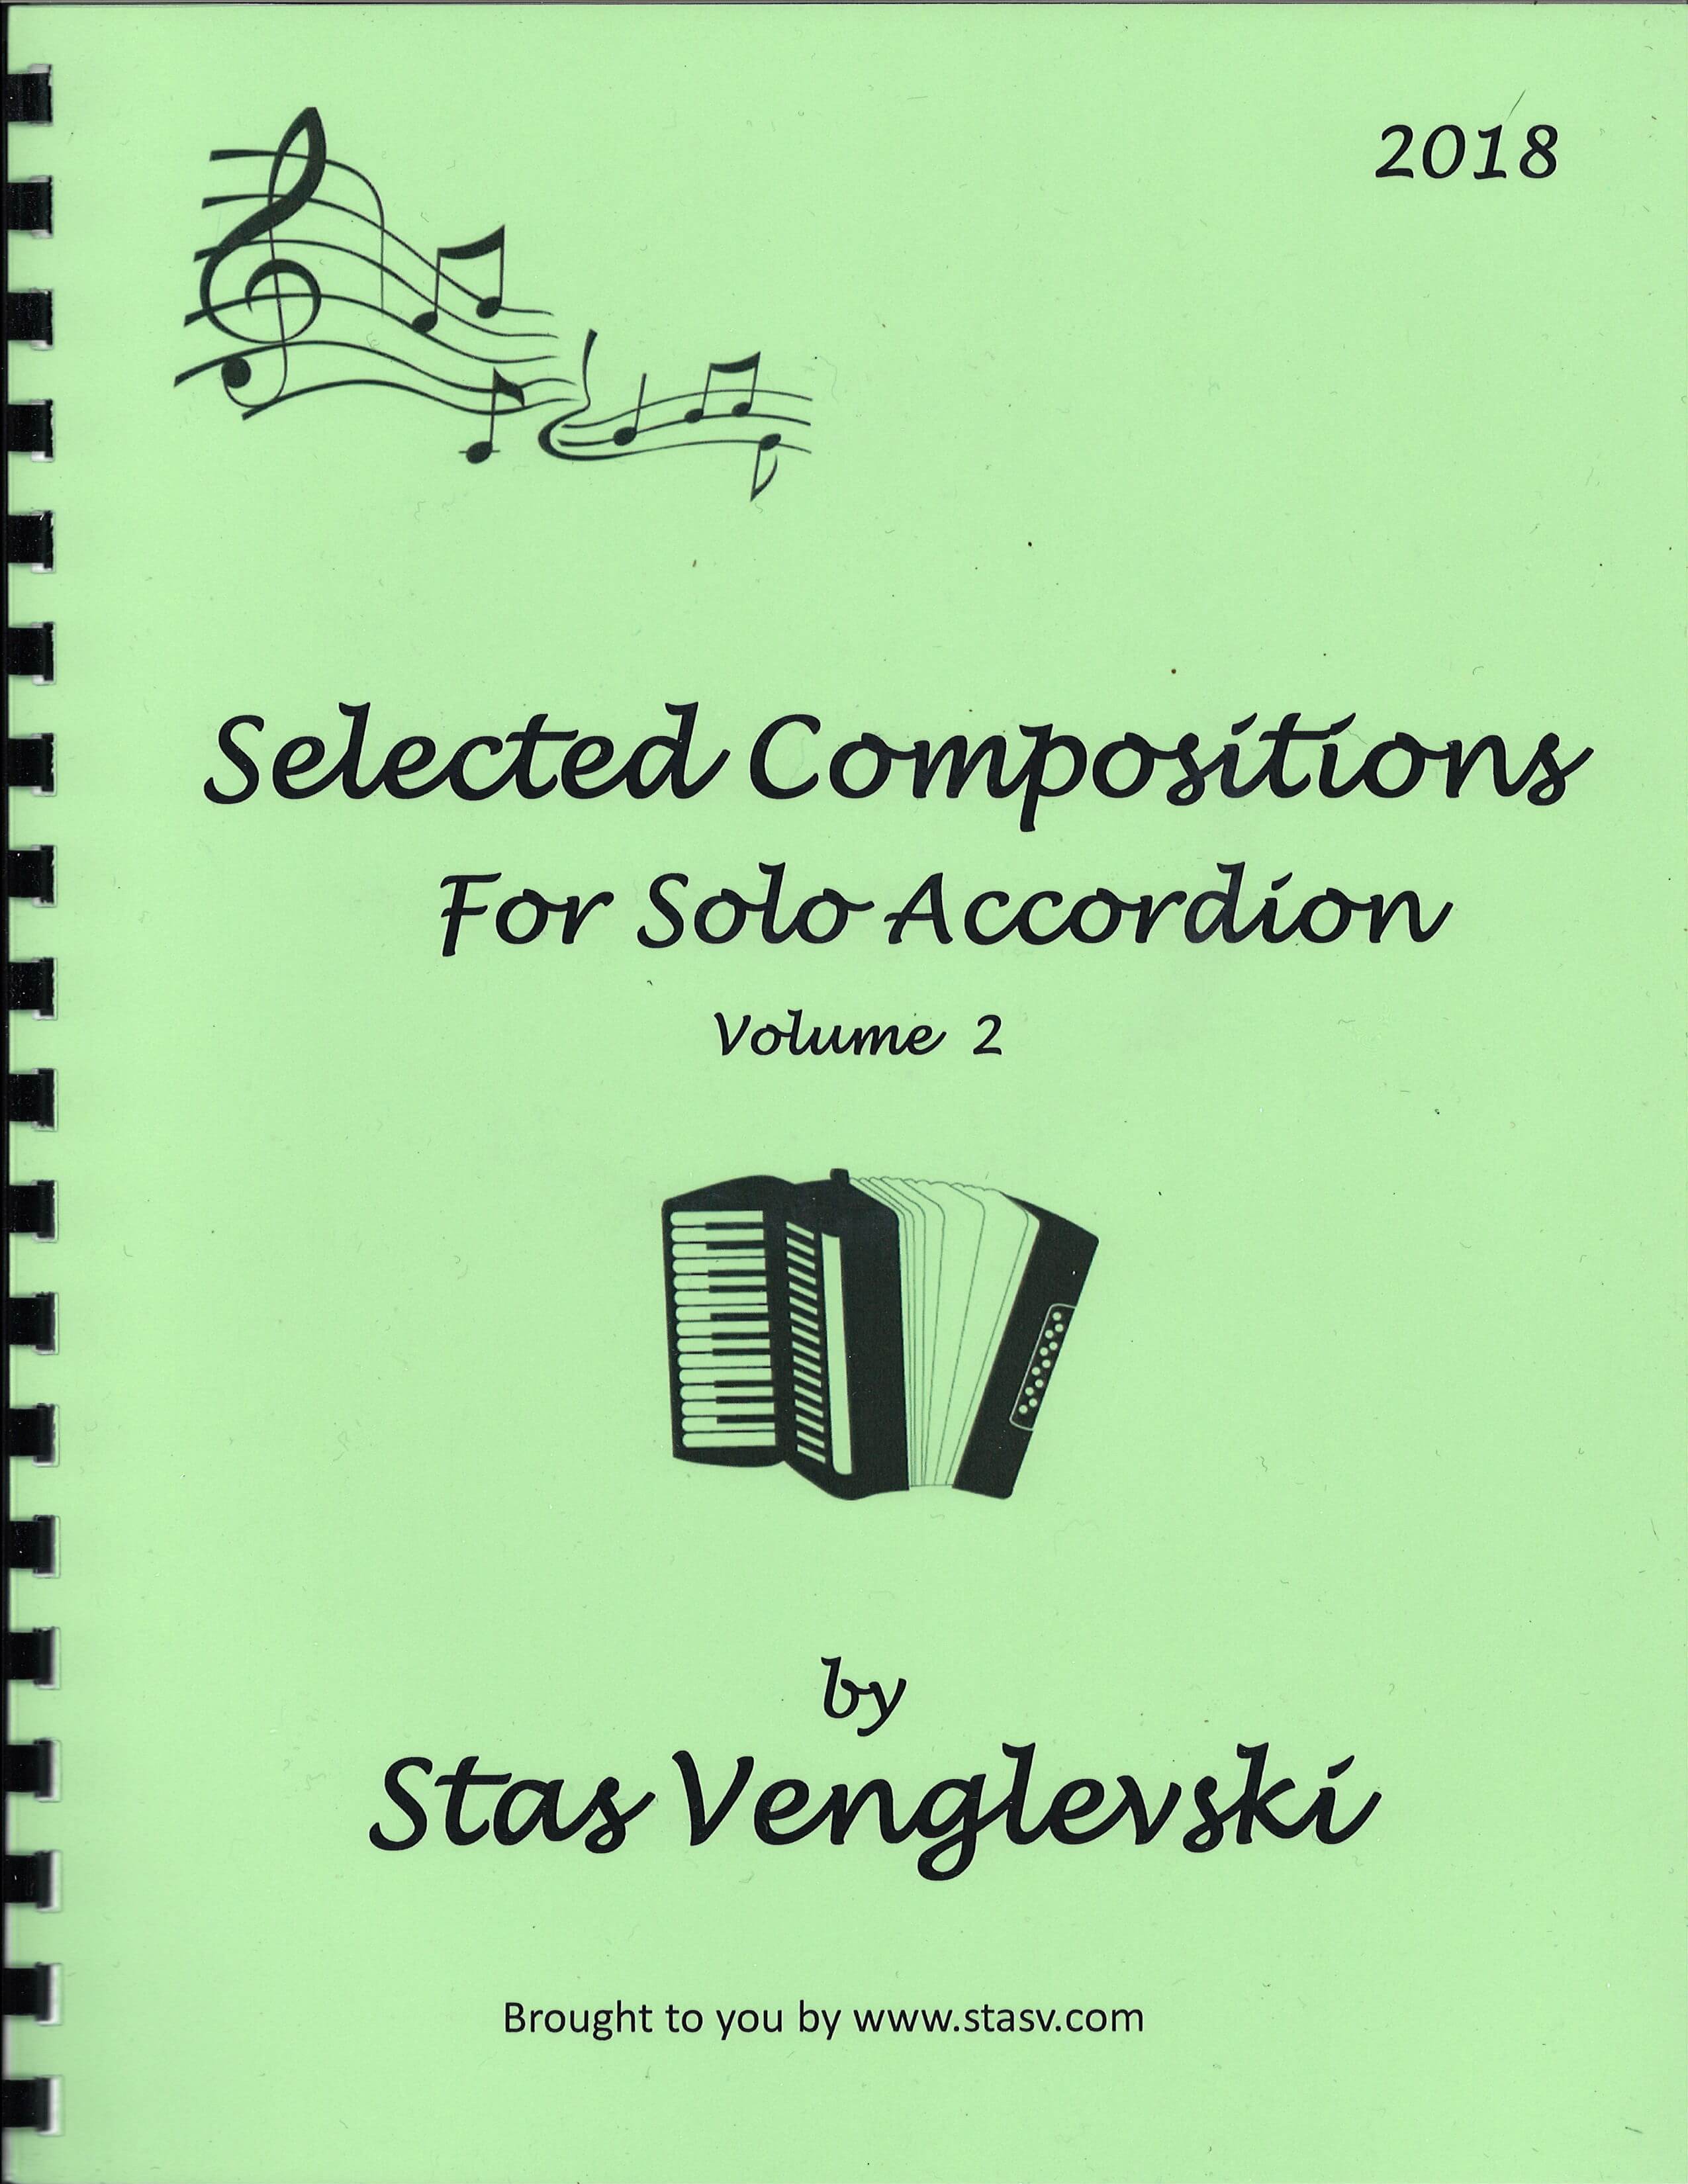 Selected Compositions for Solo Accordion Volume 2